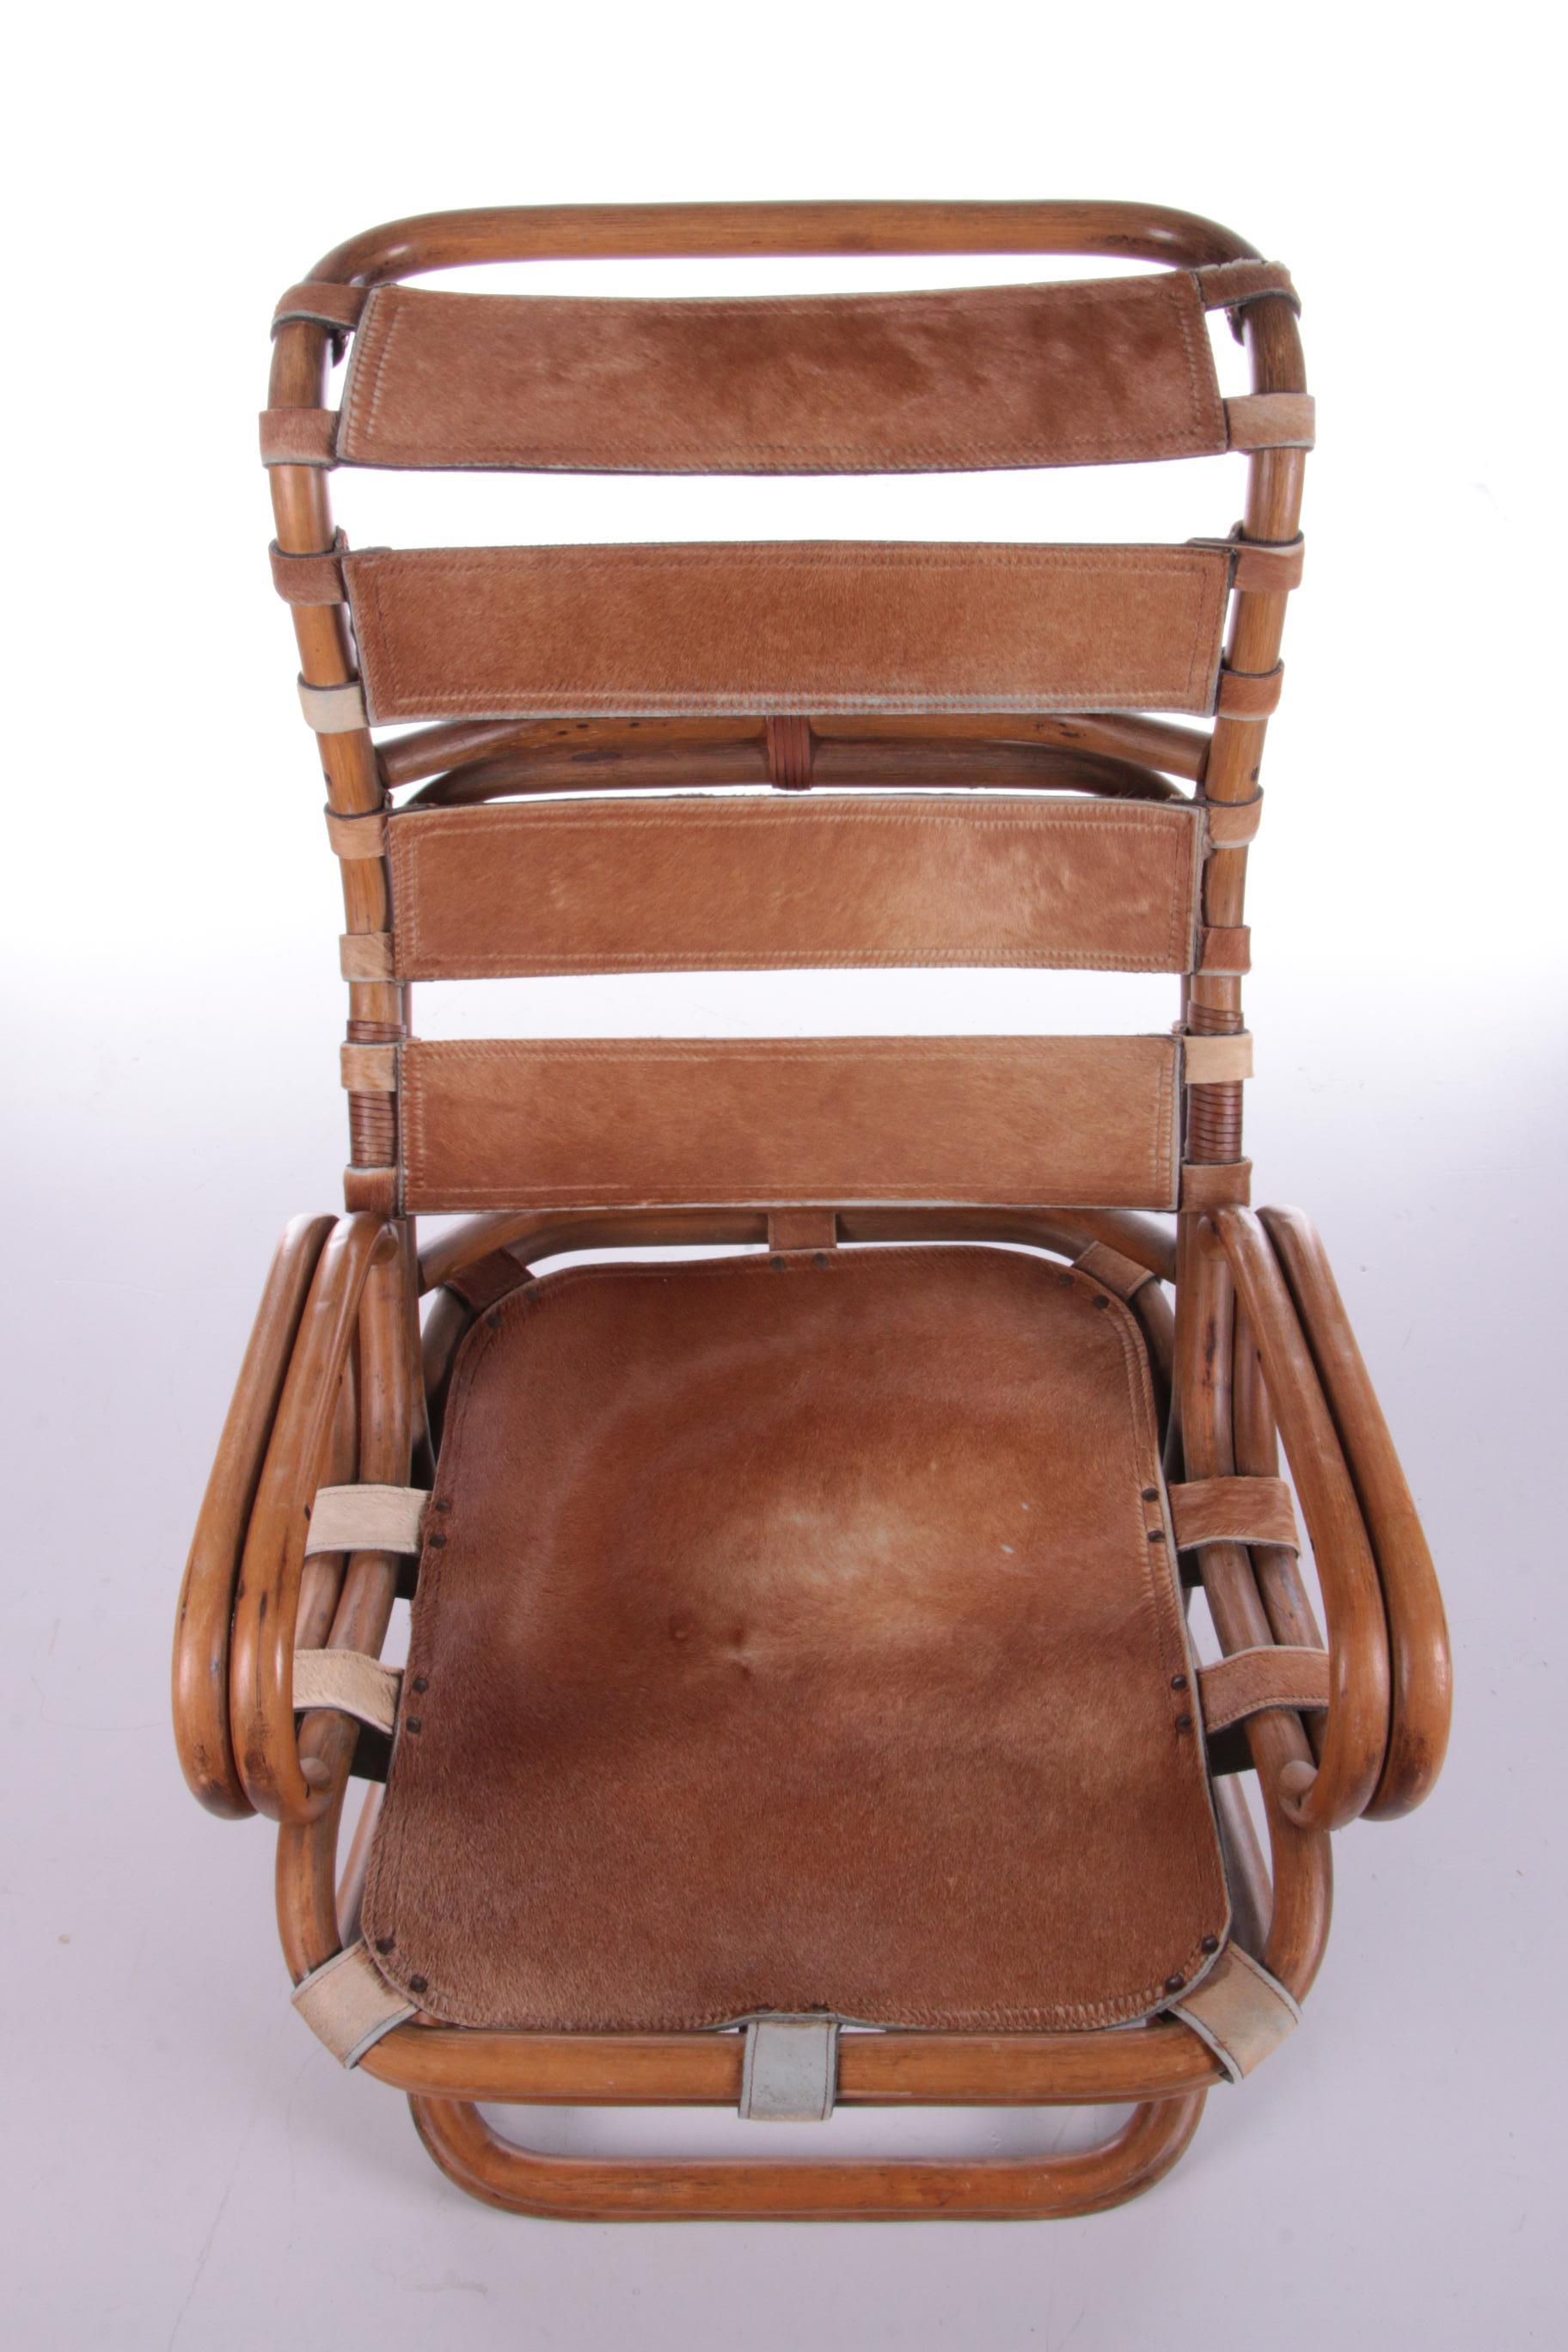 Tito Agnoli Relax Chair Made of Bamboo and Leather, 1960 For Sale 8